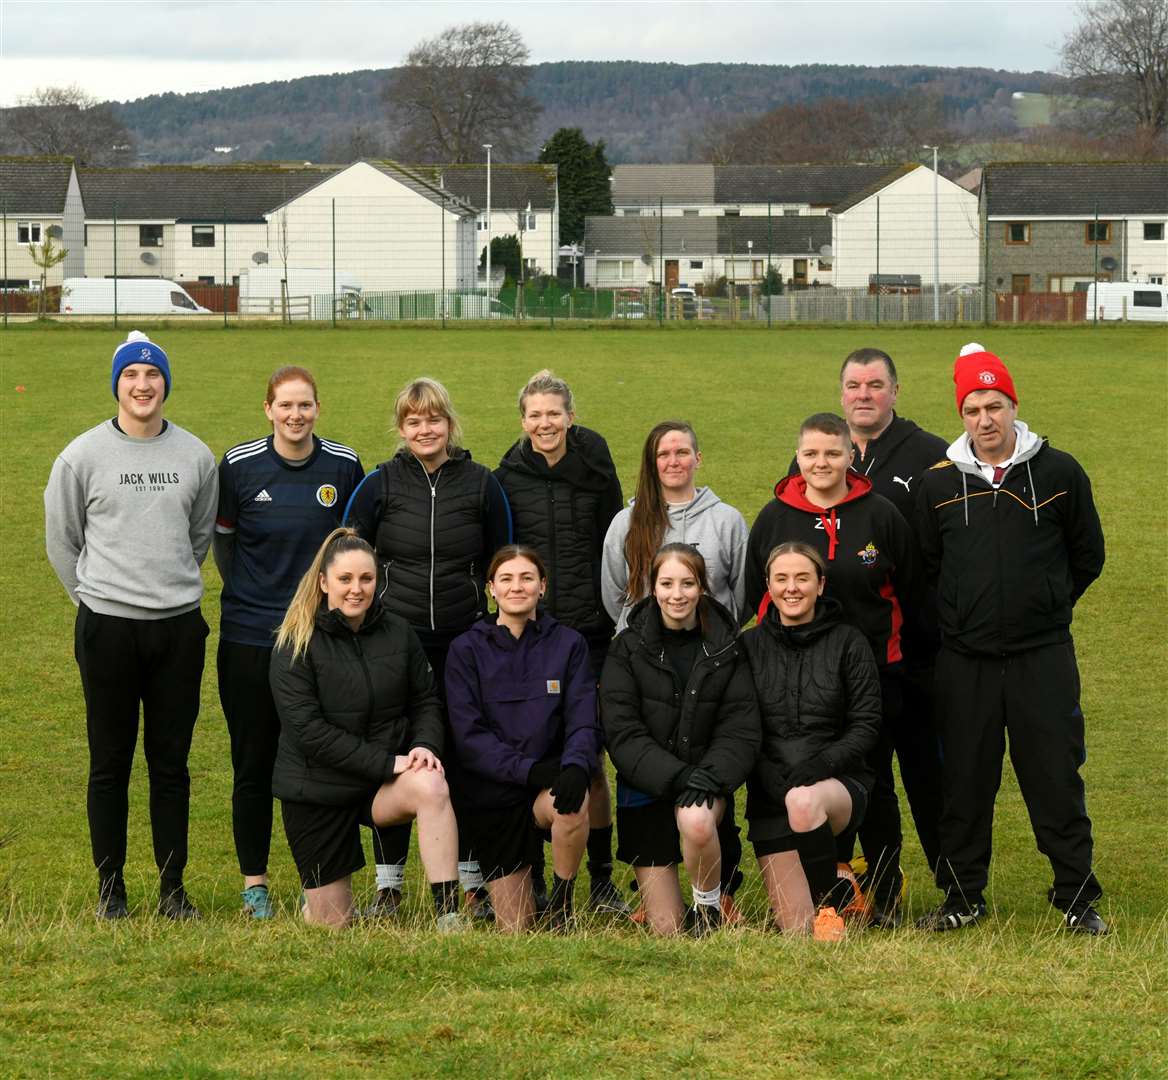 Luca Micheletti, coach, Megan Finlay, goalie, Sophie Paton, defence, Mary Peteranna, assistant coach, Katie Crook, Left back, Zoe Morrison, outfield, Alan Coles, coach, Iain Firth, coach, Simone Coles, striker, Alice Urquhart, centre mid, Leanne Firth, right wing, and Michelle Macinnes, winger. Picture: James Mackenzie.